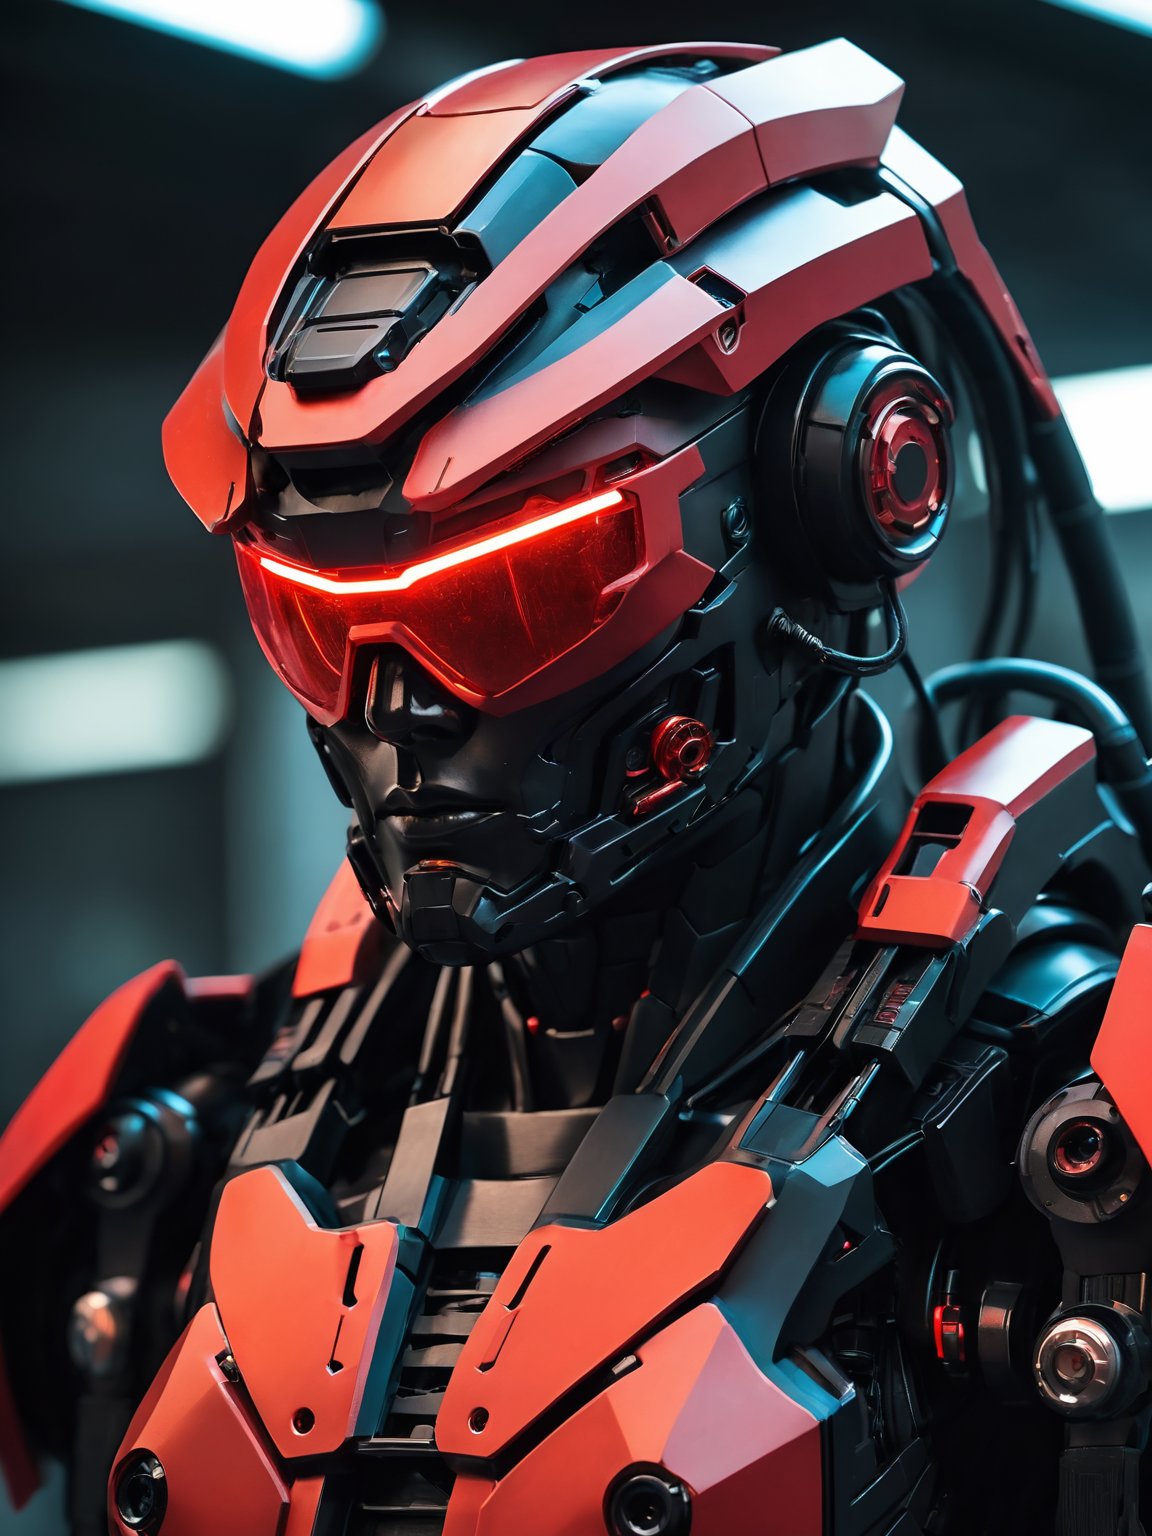 Futuristic soldier,robotic armor,cybernetic enhancements,red illuminated visor,detailed exoskeleton,matte black finish,tactical gear,science fiction themed,menacing presence,high-tech weaponry,dystopian warrior,red and black color scheme,close-up portrait,dramatic lighting,